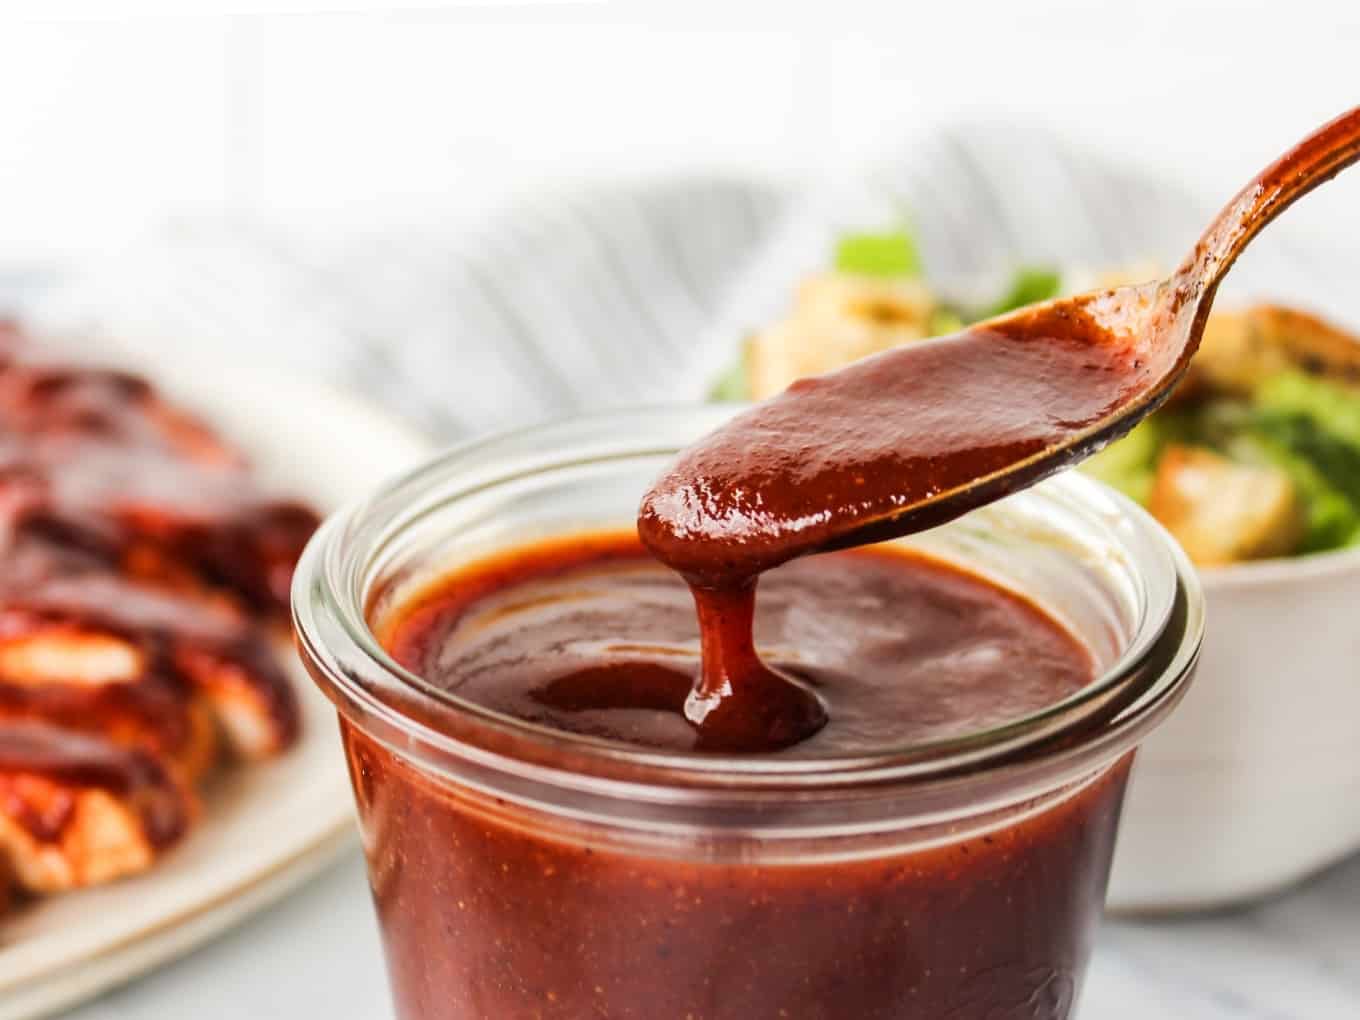 https://thewholecook.com/wp-content/uploads/2021/04/Homemade-Barbecue-Sauce-by-The-Whole-Cook-horizontal.jpg